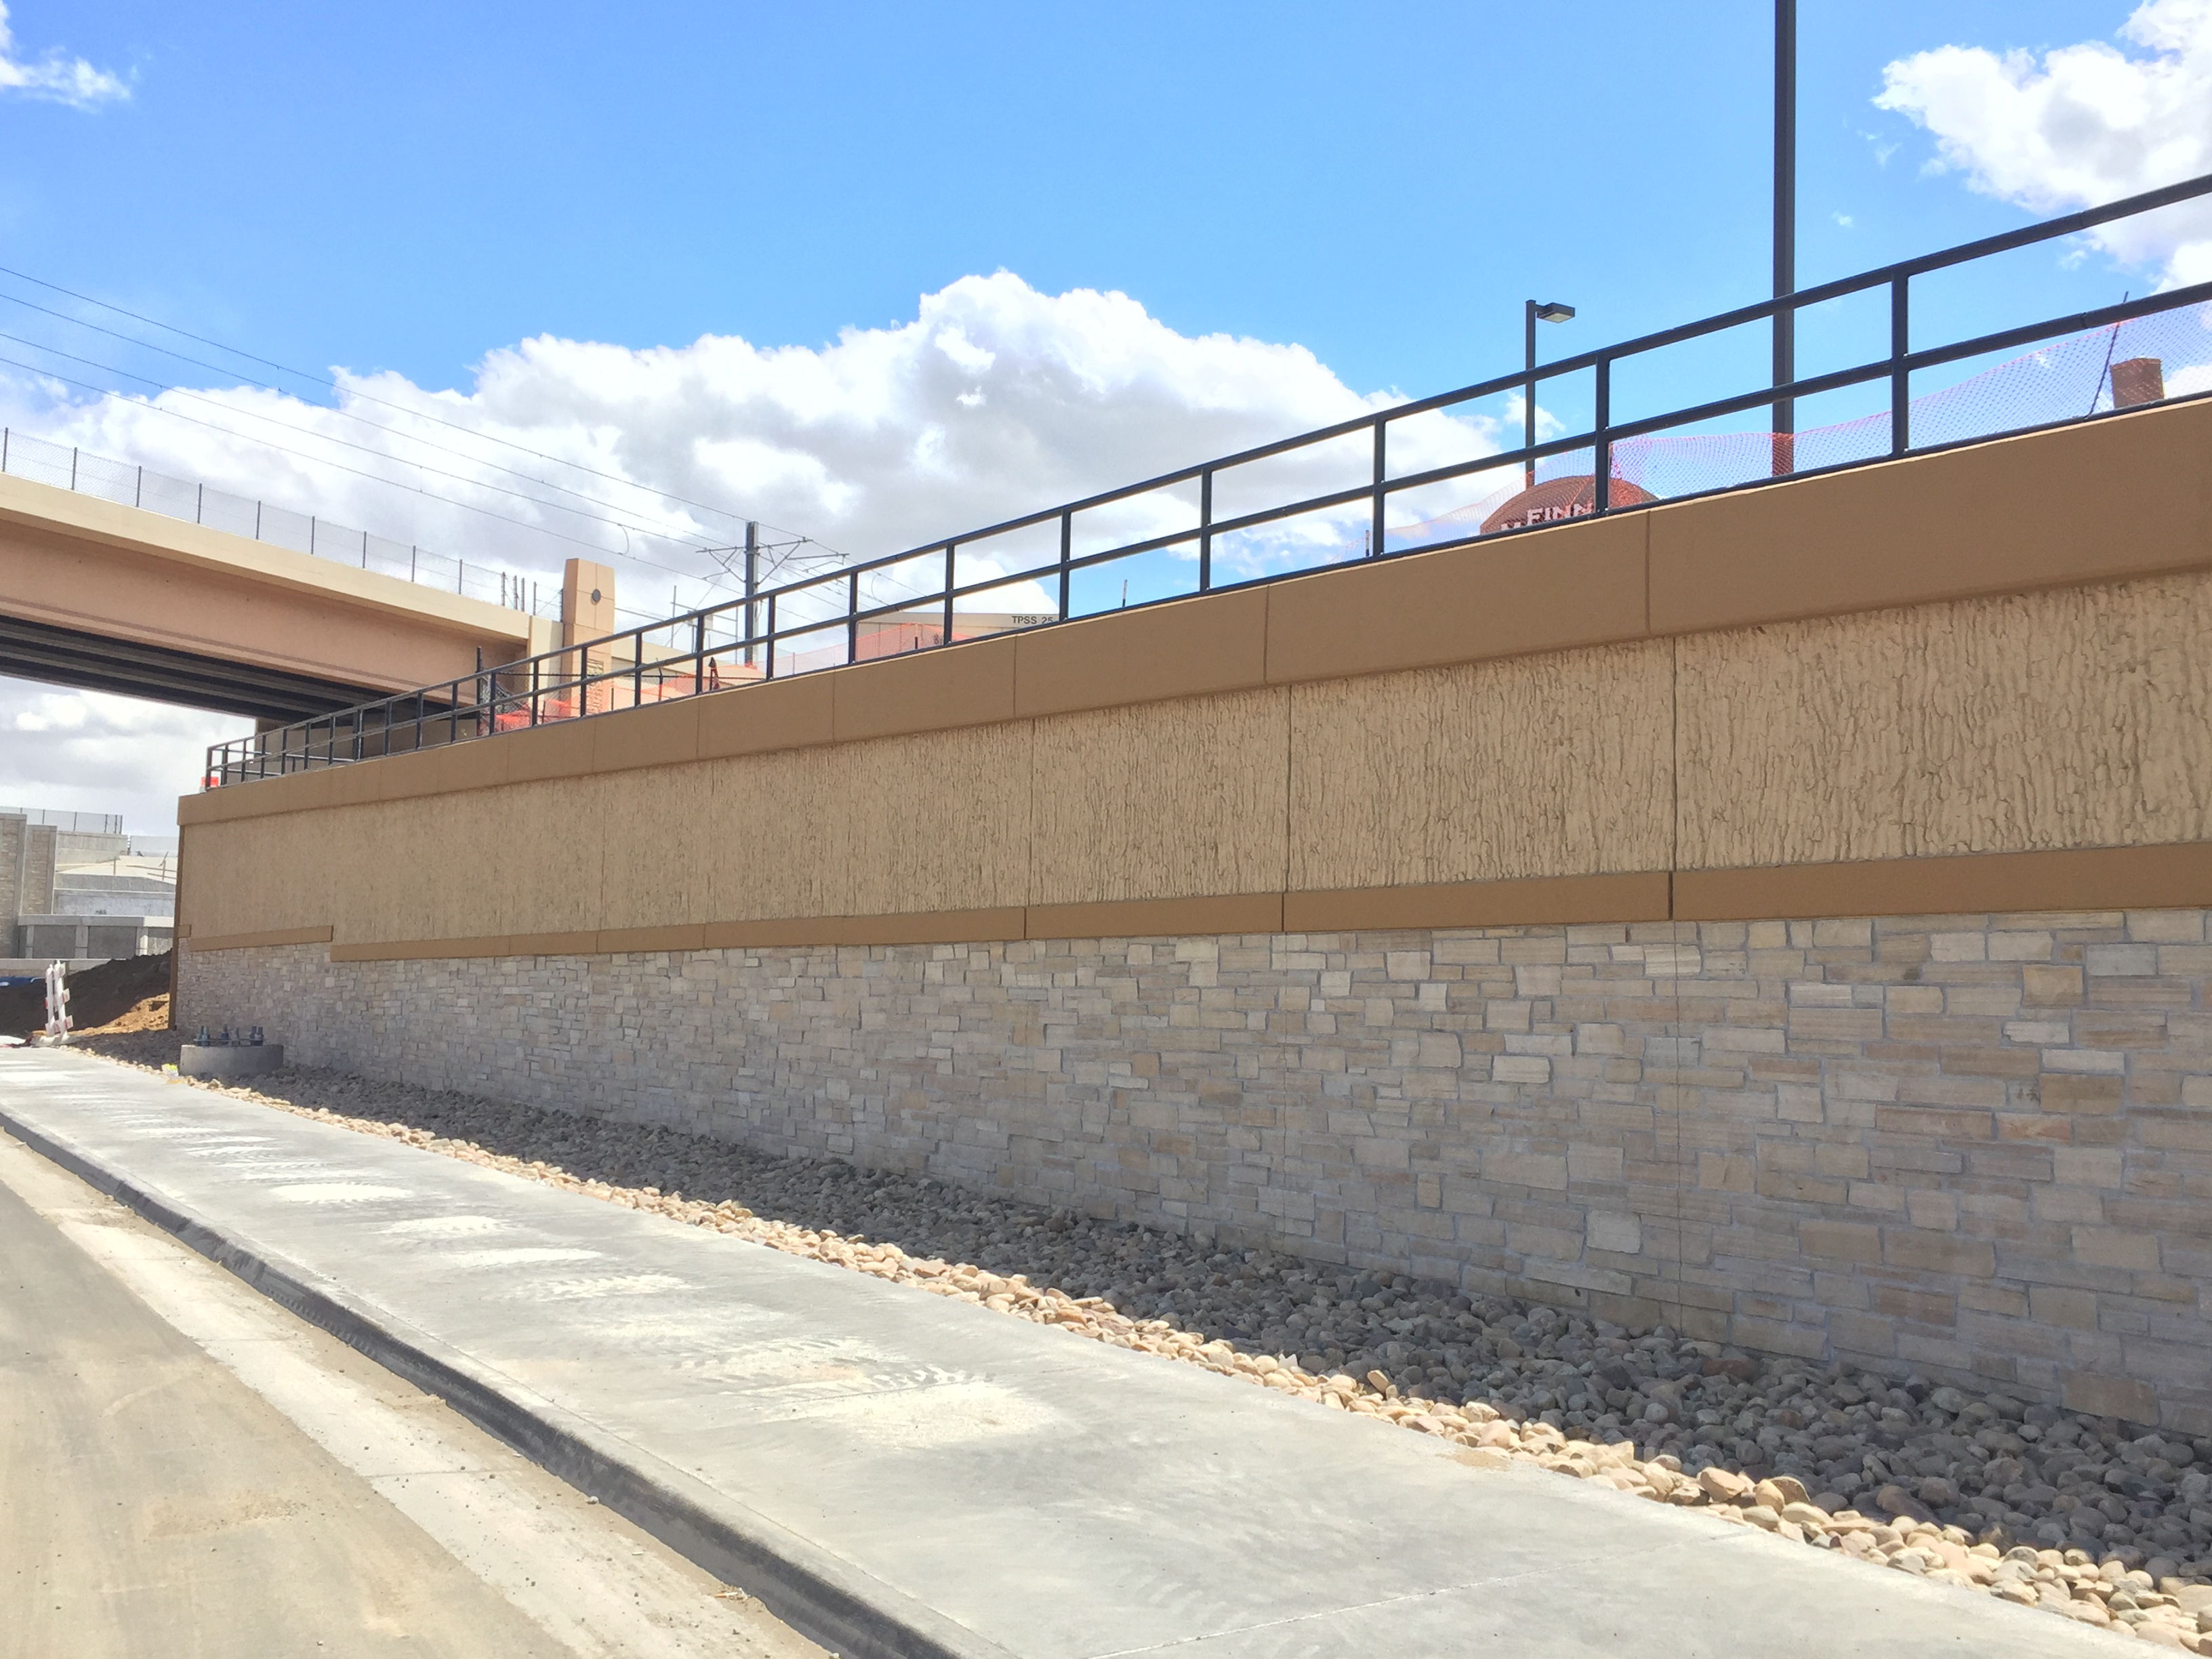 New wall south of Arapahoe Road - April 2017